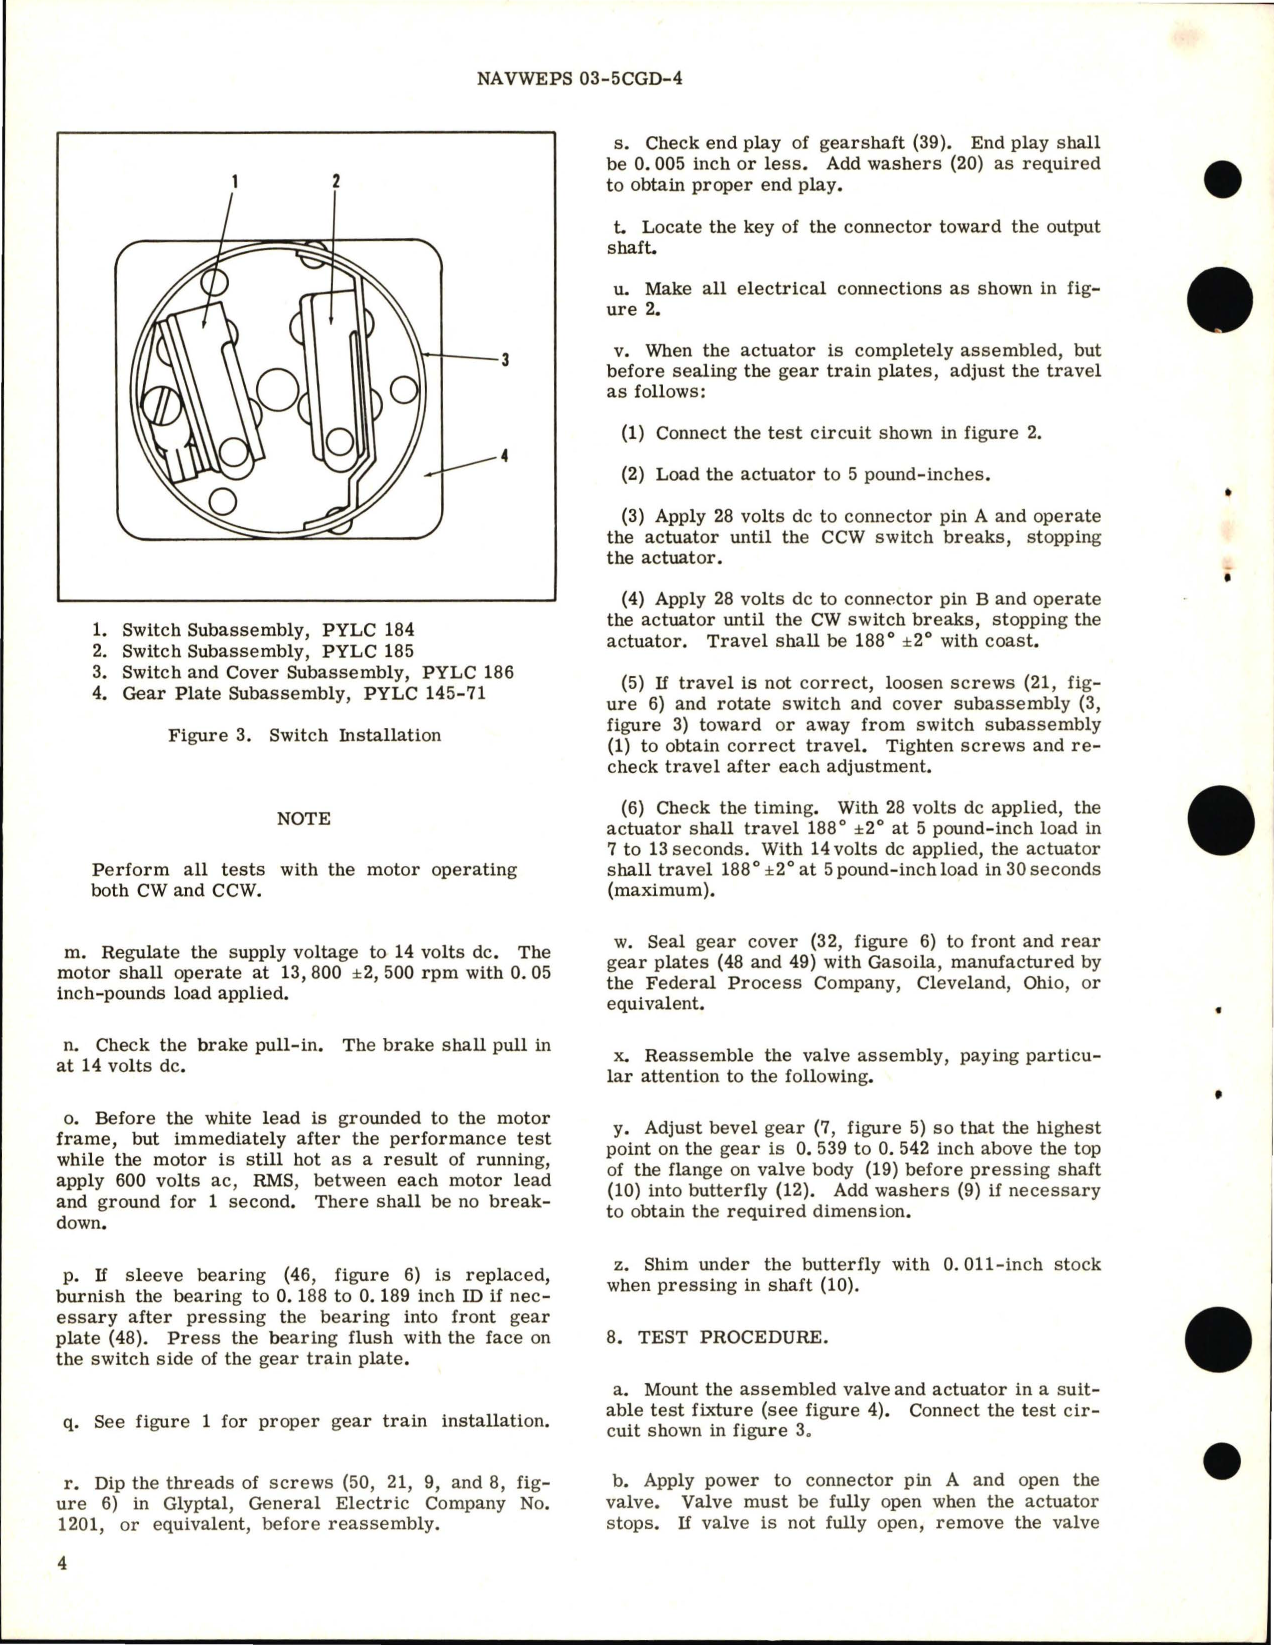 Sample page 6 from AirCorps Library document: Overhaul Instructions with Illustrated Parts Breakdown for Valve and Actuator Assembly - Part DYLZ 6537 and DYLZ 6537-1